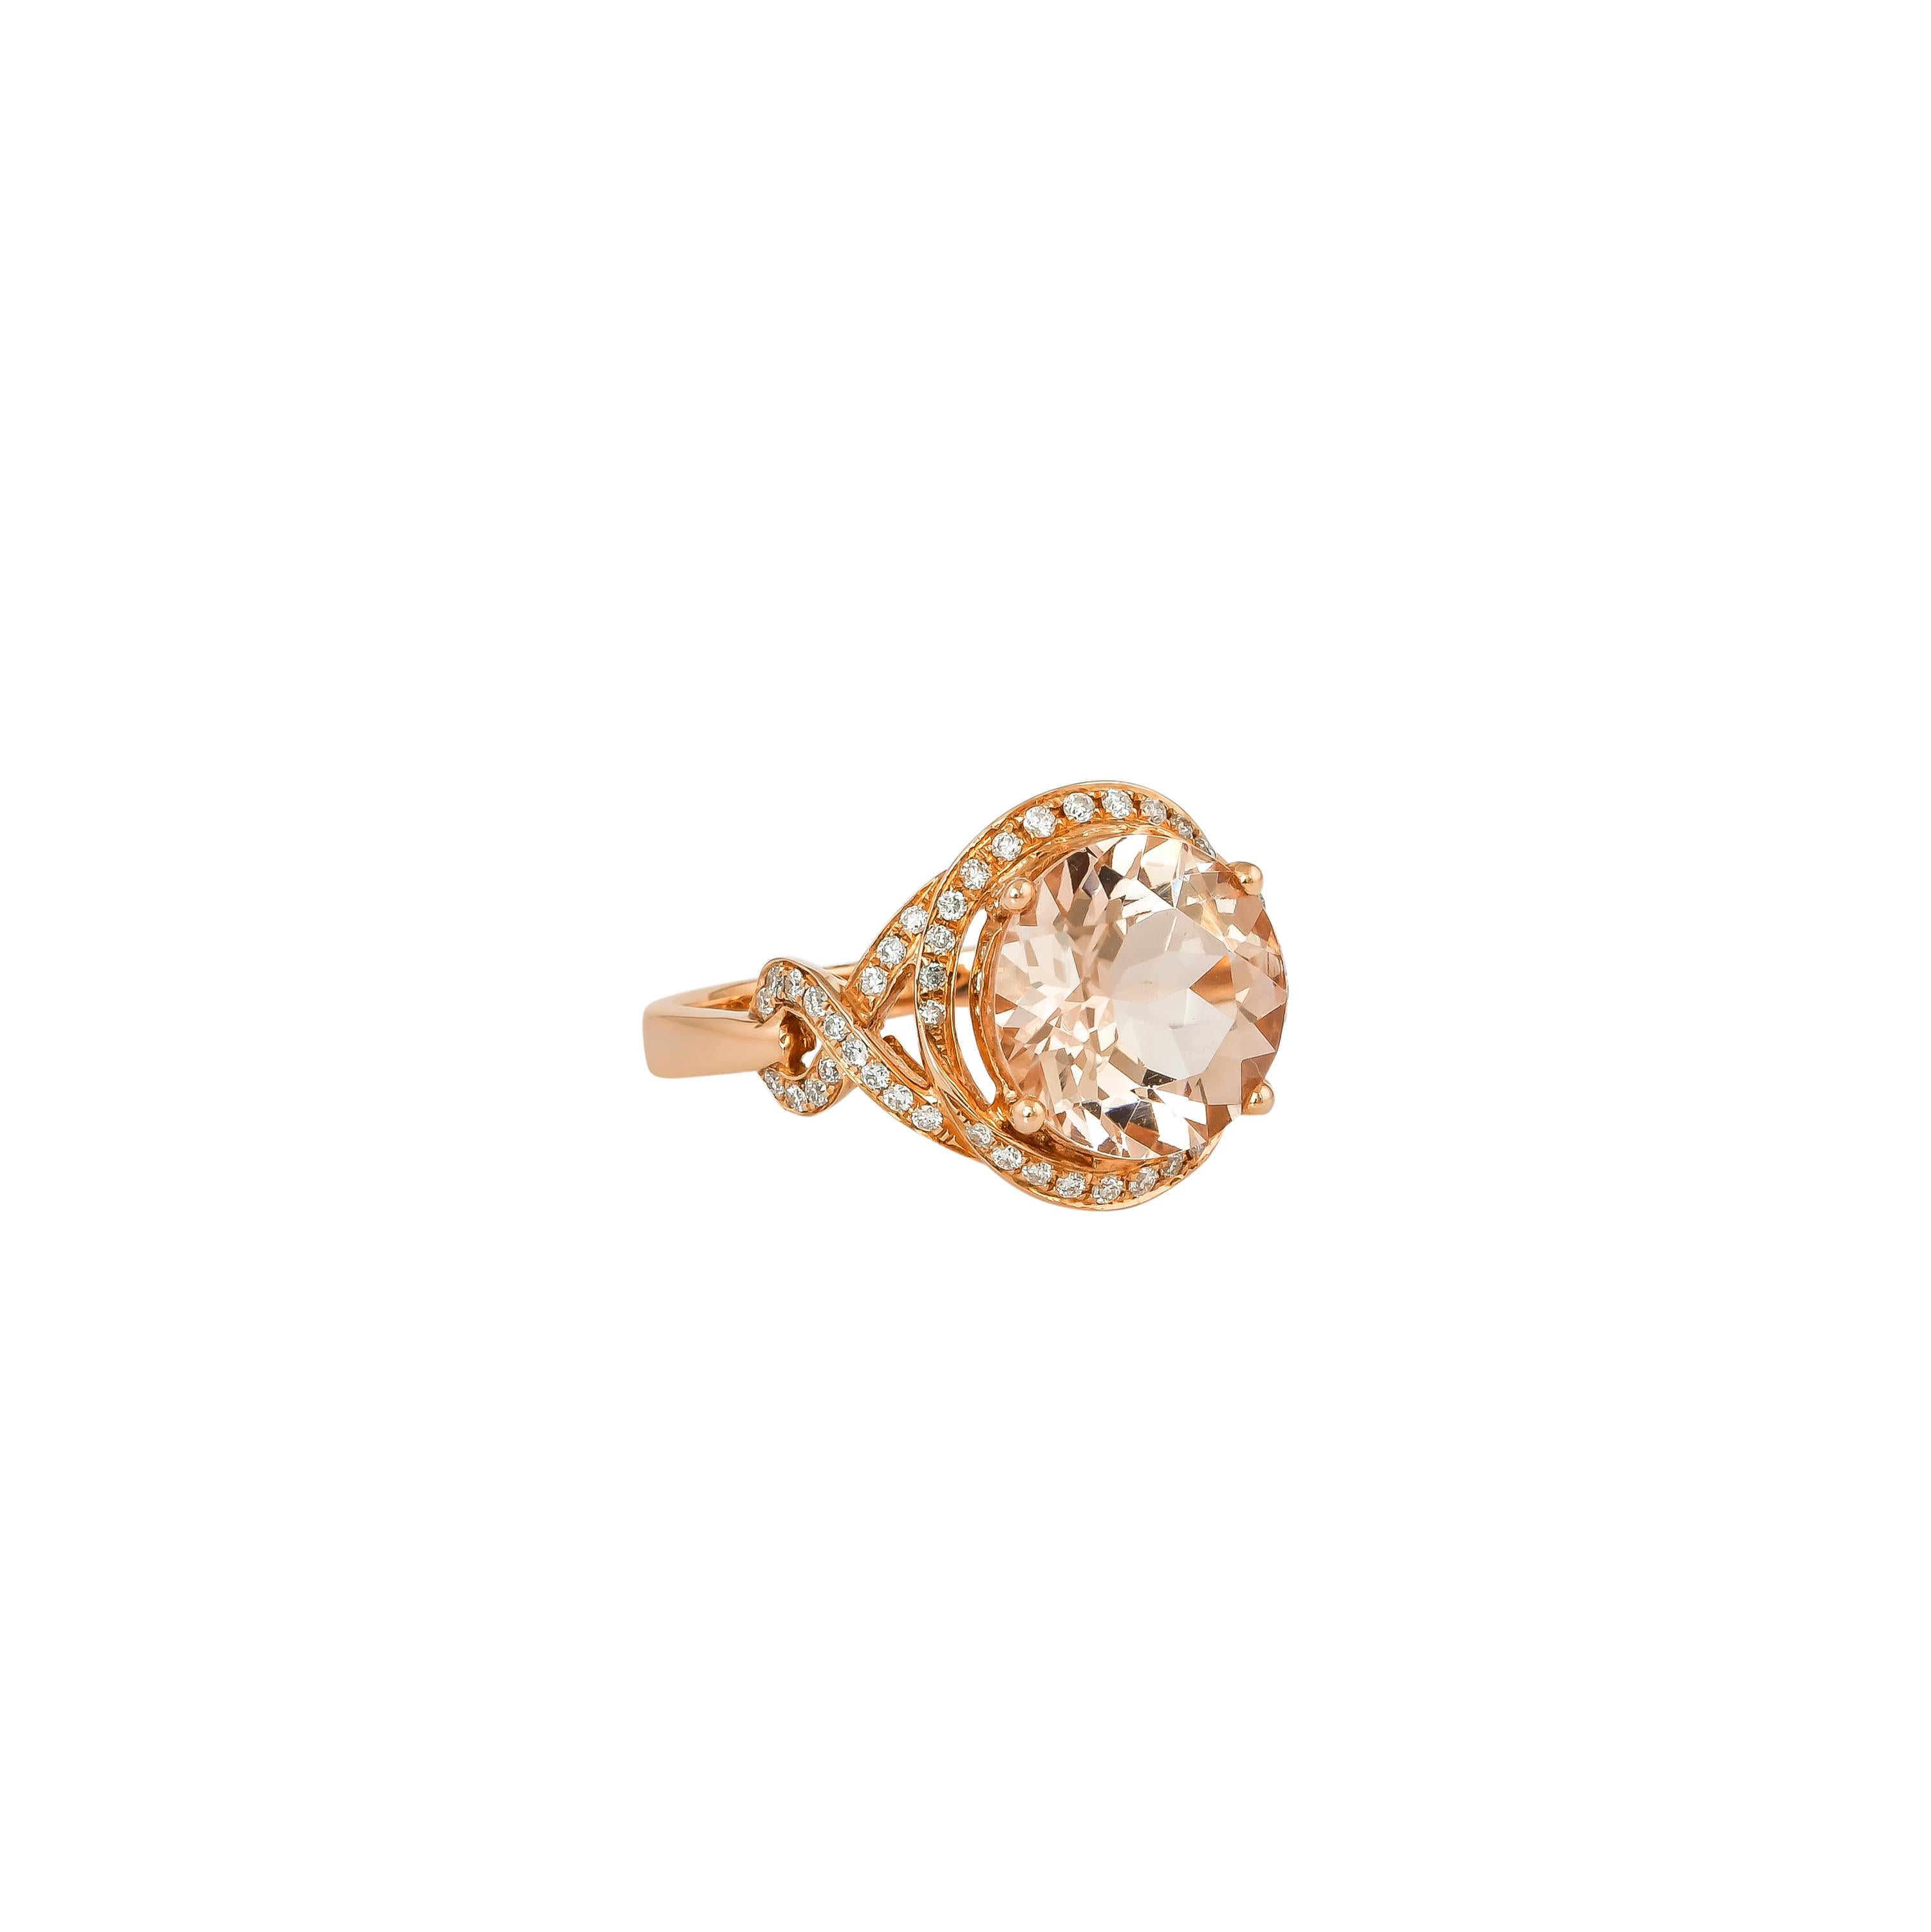 This collection features an array of magnificent morganites! Accented with diamonds these rings are made in rose gold and present a classic yet elegant look. 

Classic morganite ring in 18K rose gold with diamonds. 

Morganite: 3.34 carat round